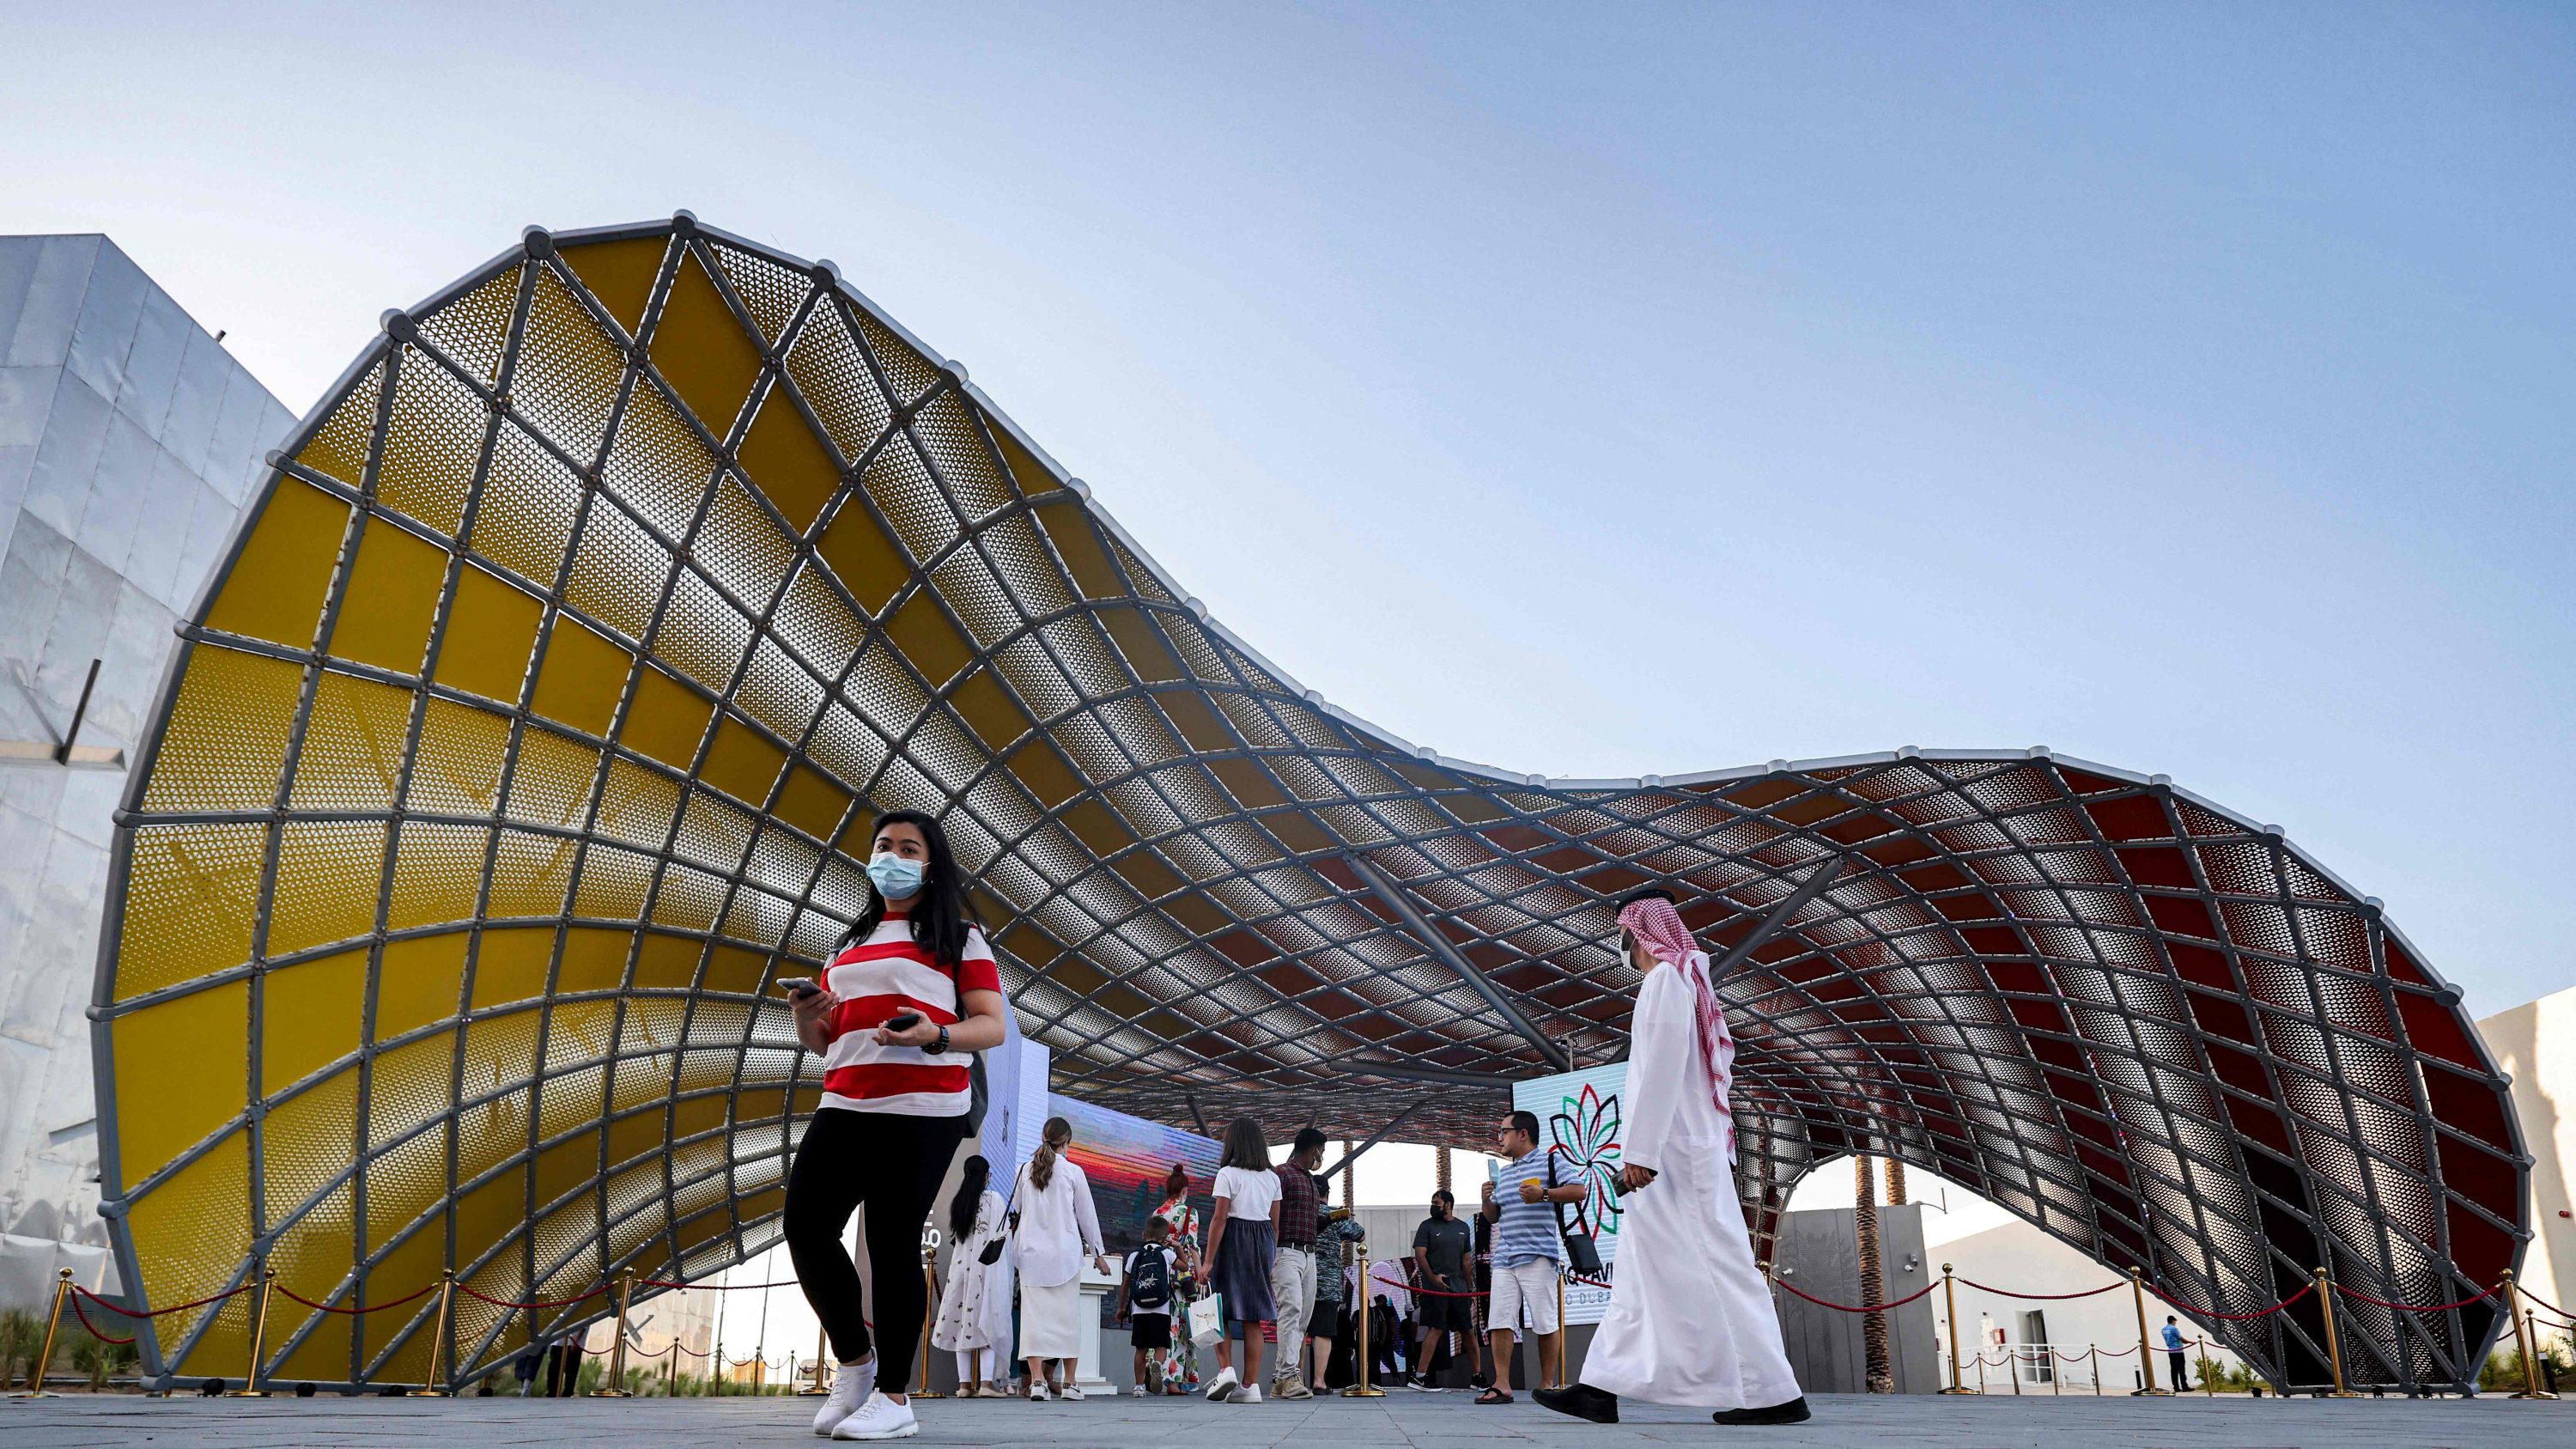 Dubai Expo 2020 offers conflicting figures on worker deaths